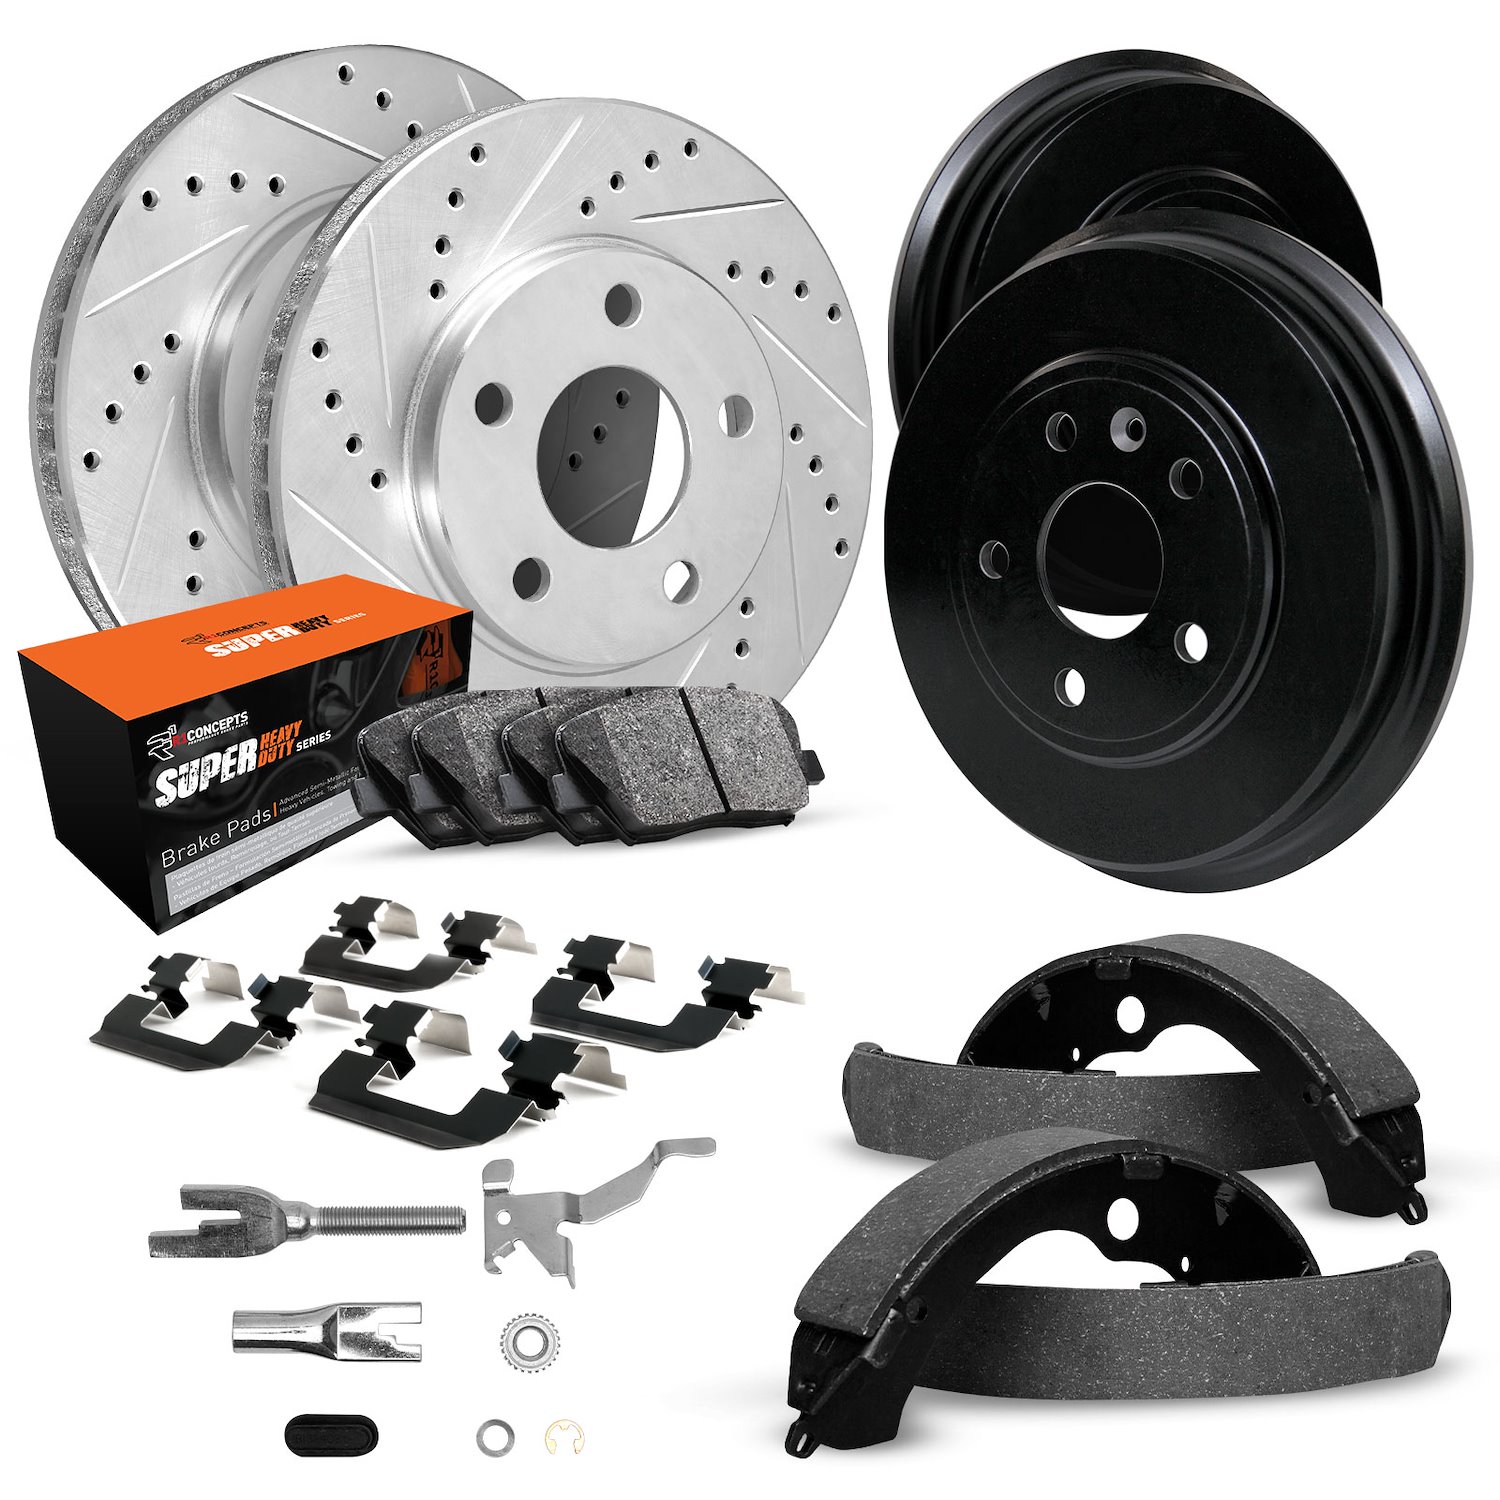 E-Line Drilled/Slotted Silver Rotor & Drum Set w/Super-Duty Pads, Shoes/Hardware/Adjusters, 1980-1989 Ford/Lincoln/Mercury/Mazda